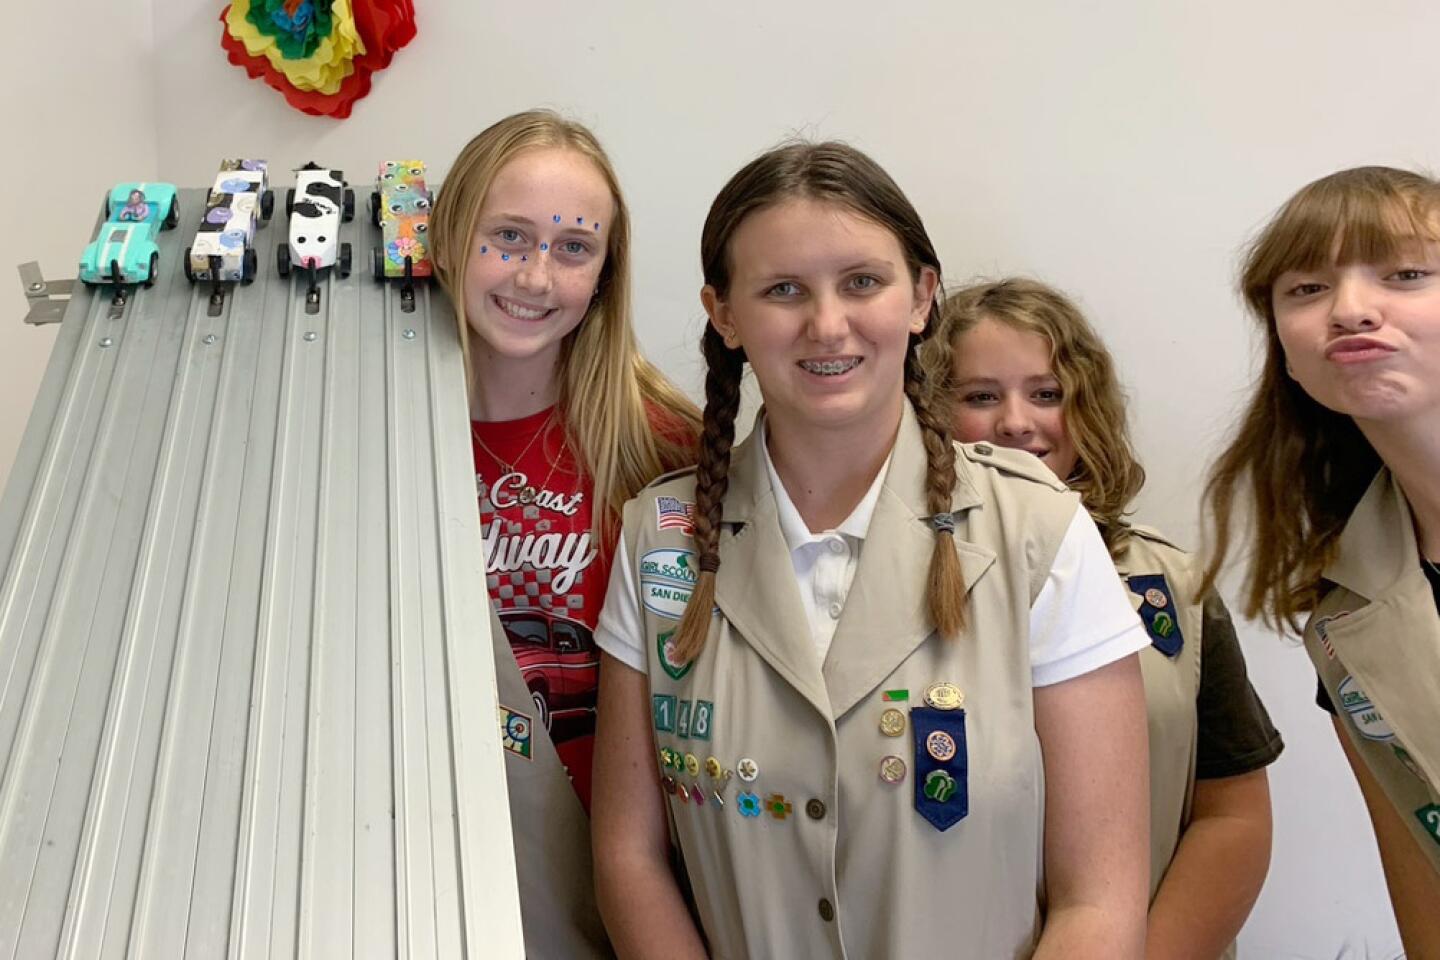 Girls at Pinewood Derby: The new face of Boy Scouting